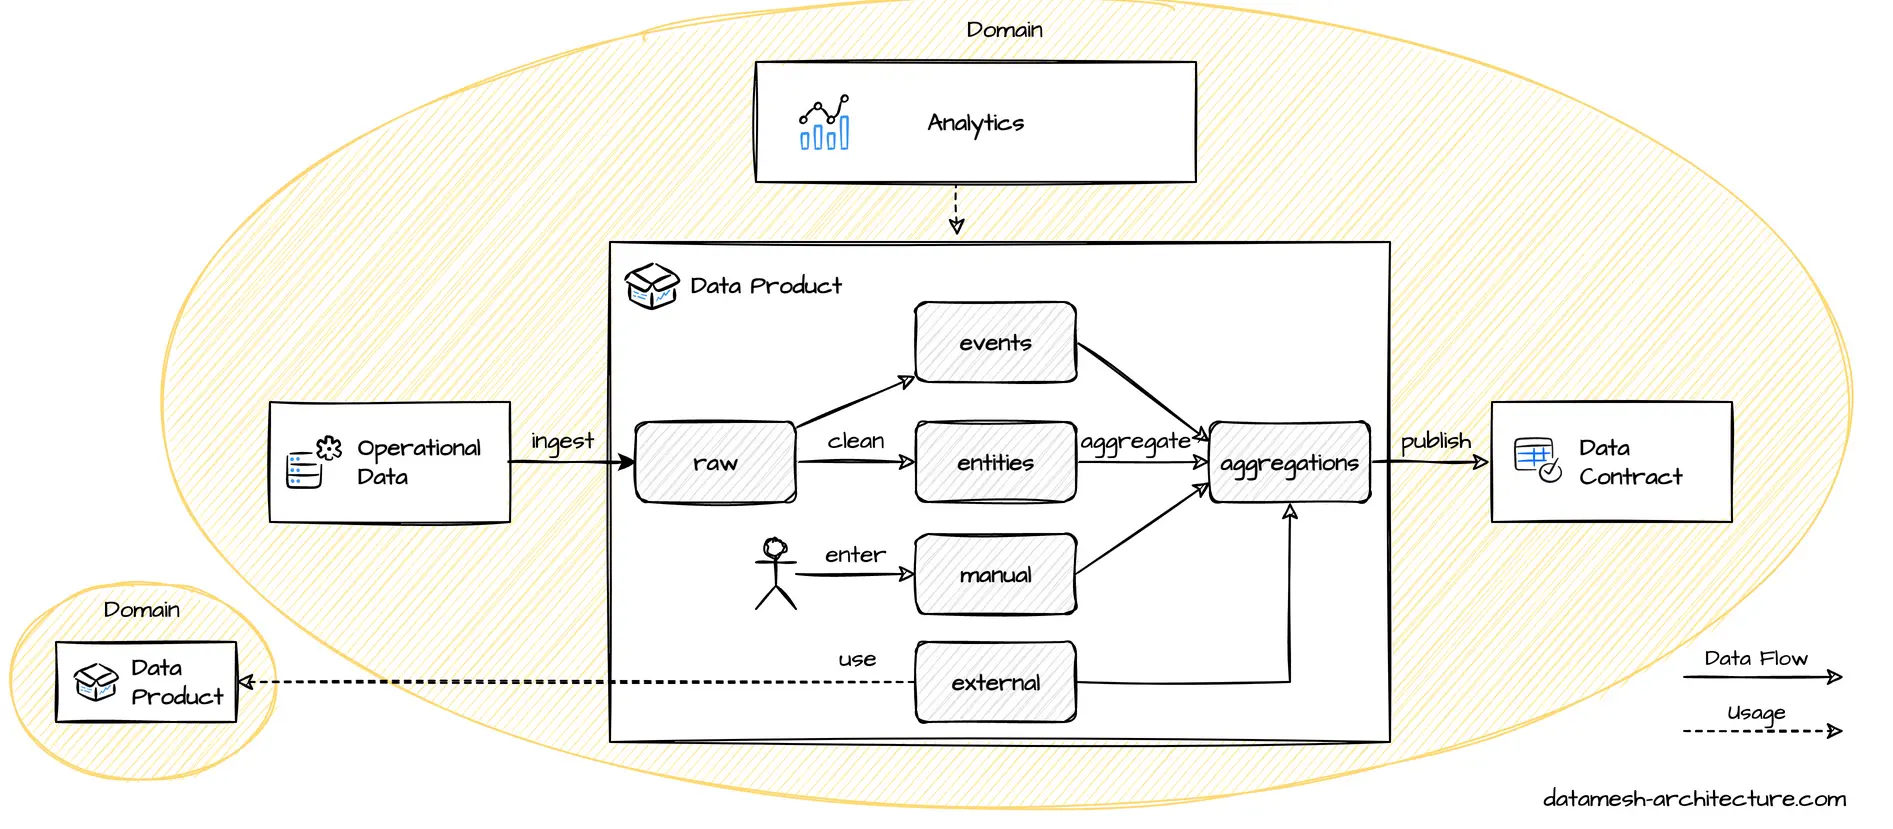 More detailed view on the analytical data of the data mesh architecture